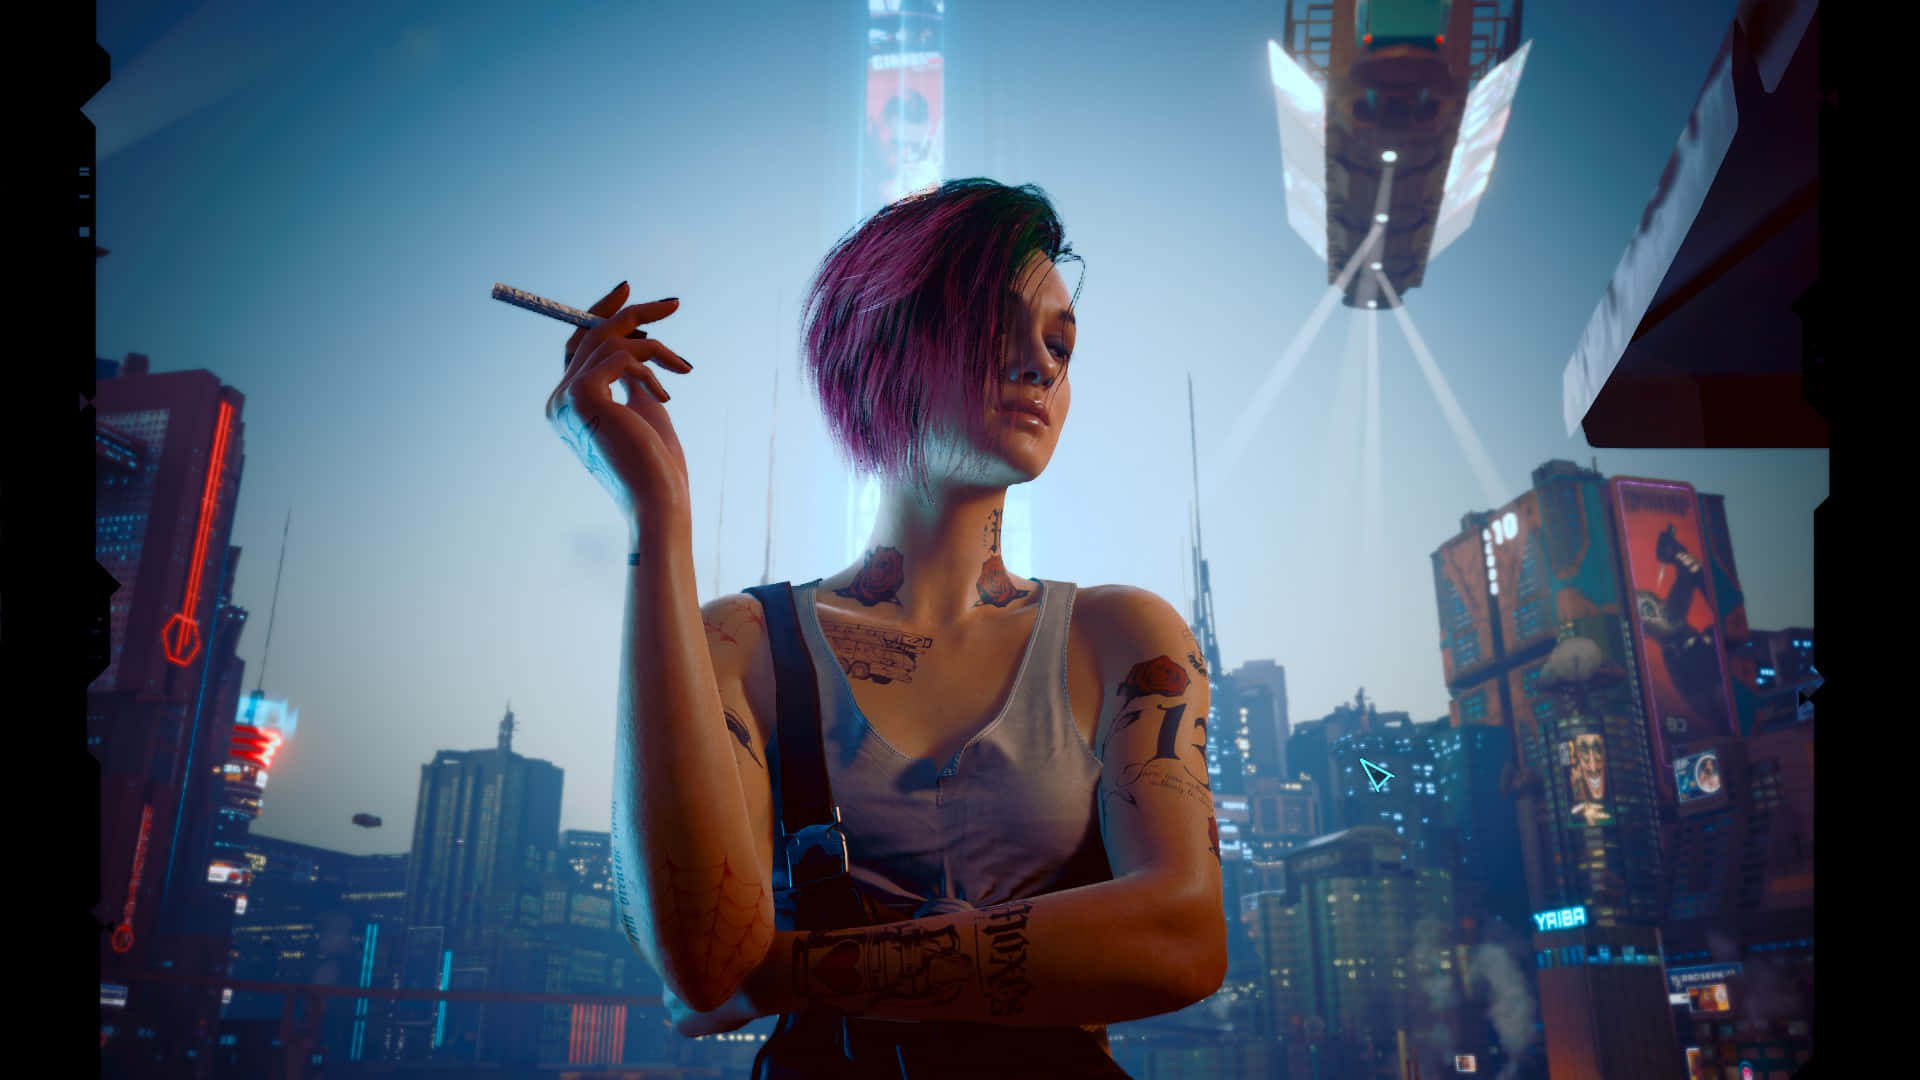 A dynamic ensemble of Cyberpunk 2077 characters wielding futuristic weapons and armor in a vibrant metropolis. Wallpaper